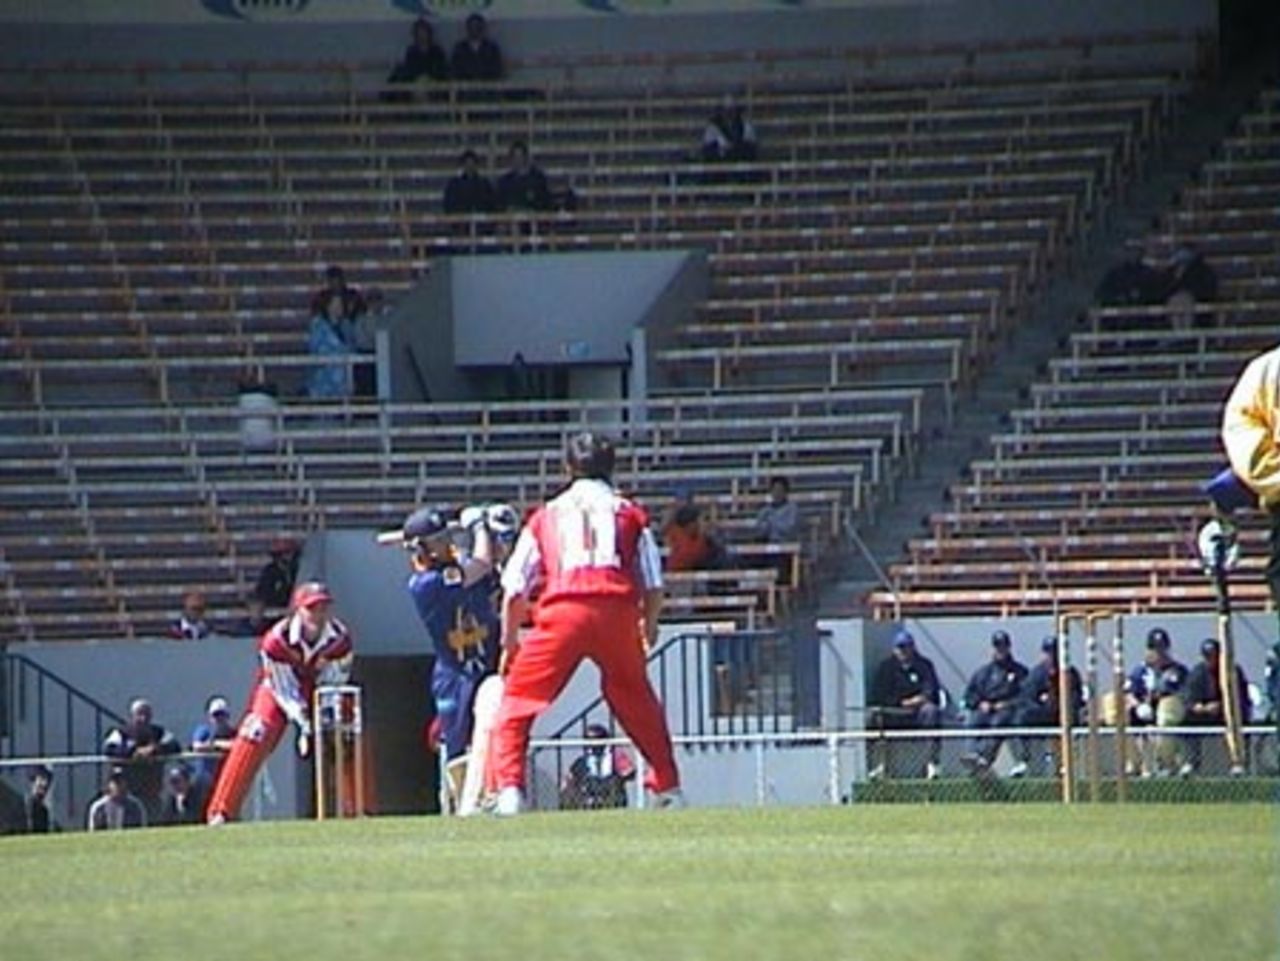 Otago batsman Chris Gaffaney pulls a delivery from Canterbury left arm orthodox spinner Carl Anderson to the midwicket boundary in his innings of 52, Shell Cup: Canterbury v Otago at Jade Stadium, Christchurch, 16 January 2001